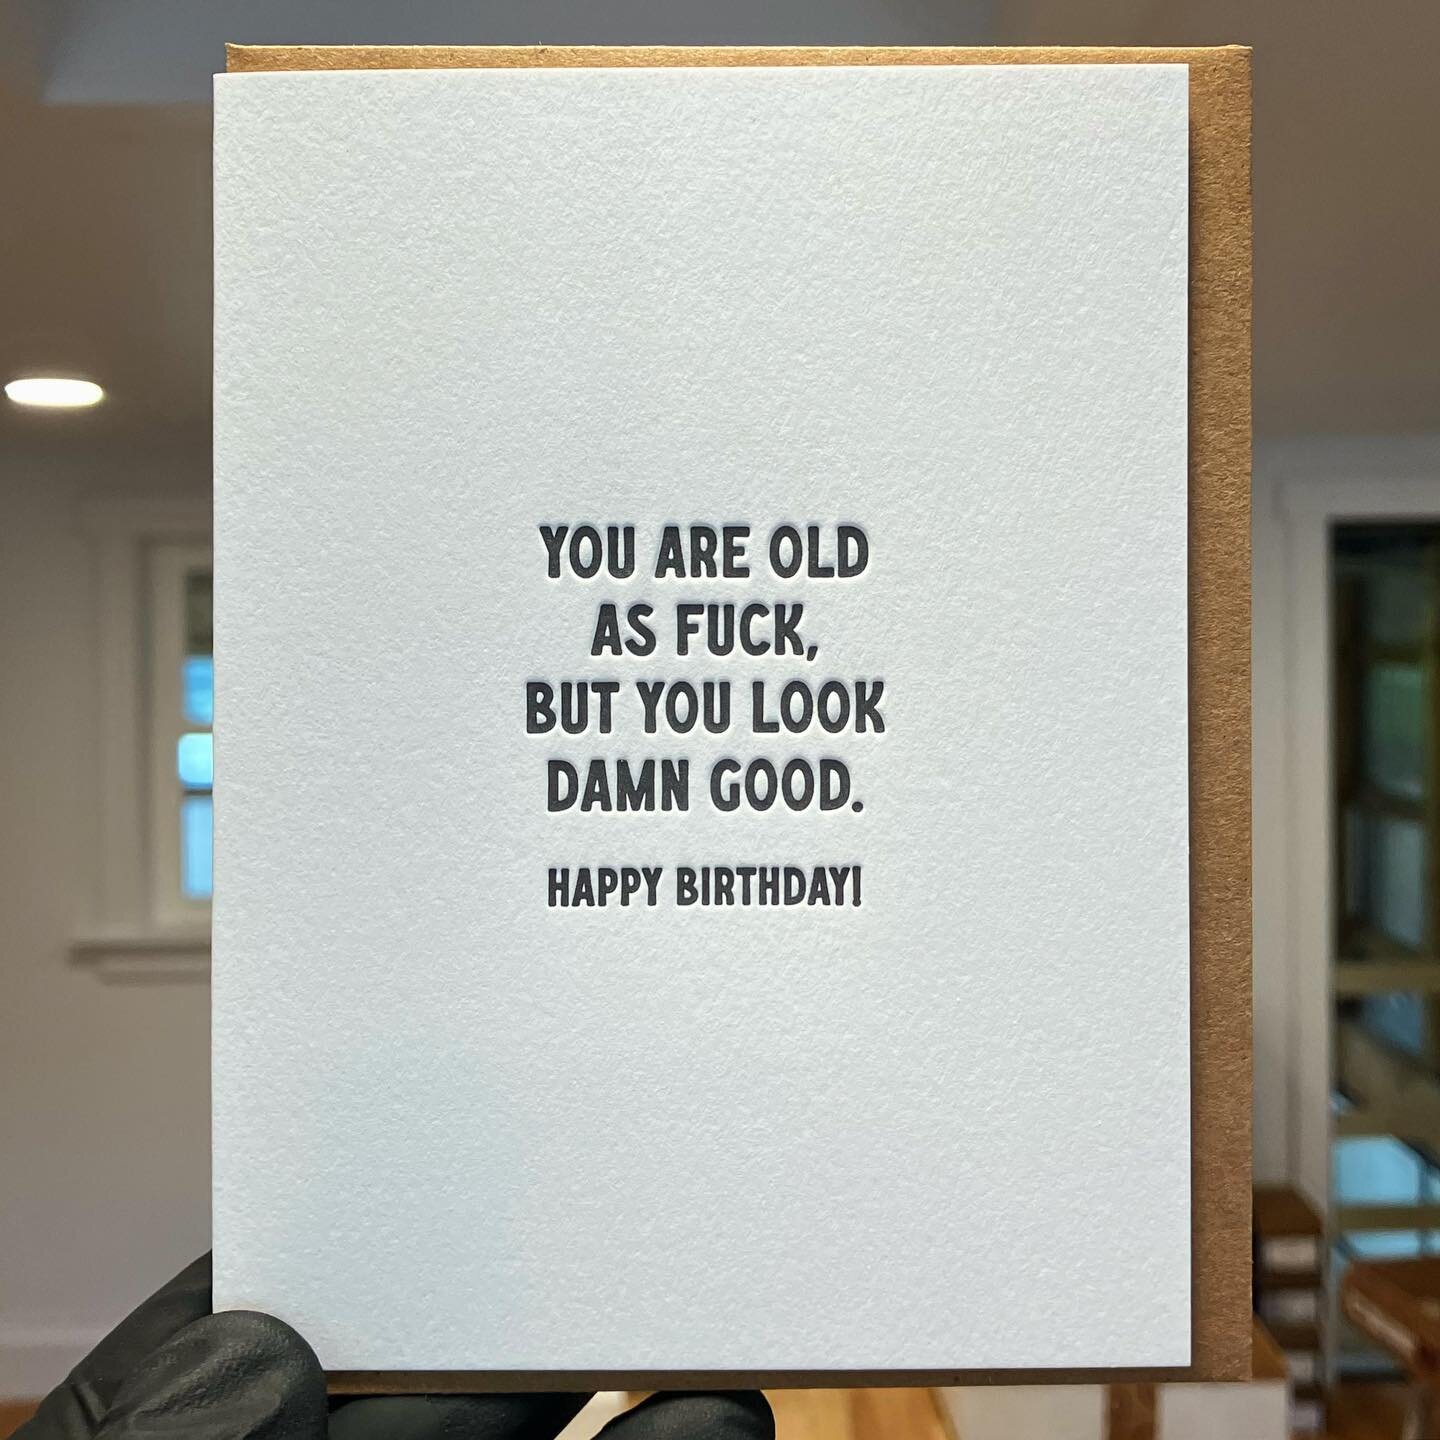 A new crowd favorite is up for a reprint today! I&rsquo;m very close to turning forty. Maybe the first half of this card applies to me 😂😂 The second half is questionable!
.
.
.
.
#letterpress #paper #handmade #print #happybirthday #birthdaycard #ol